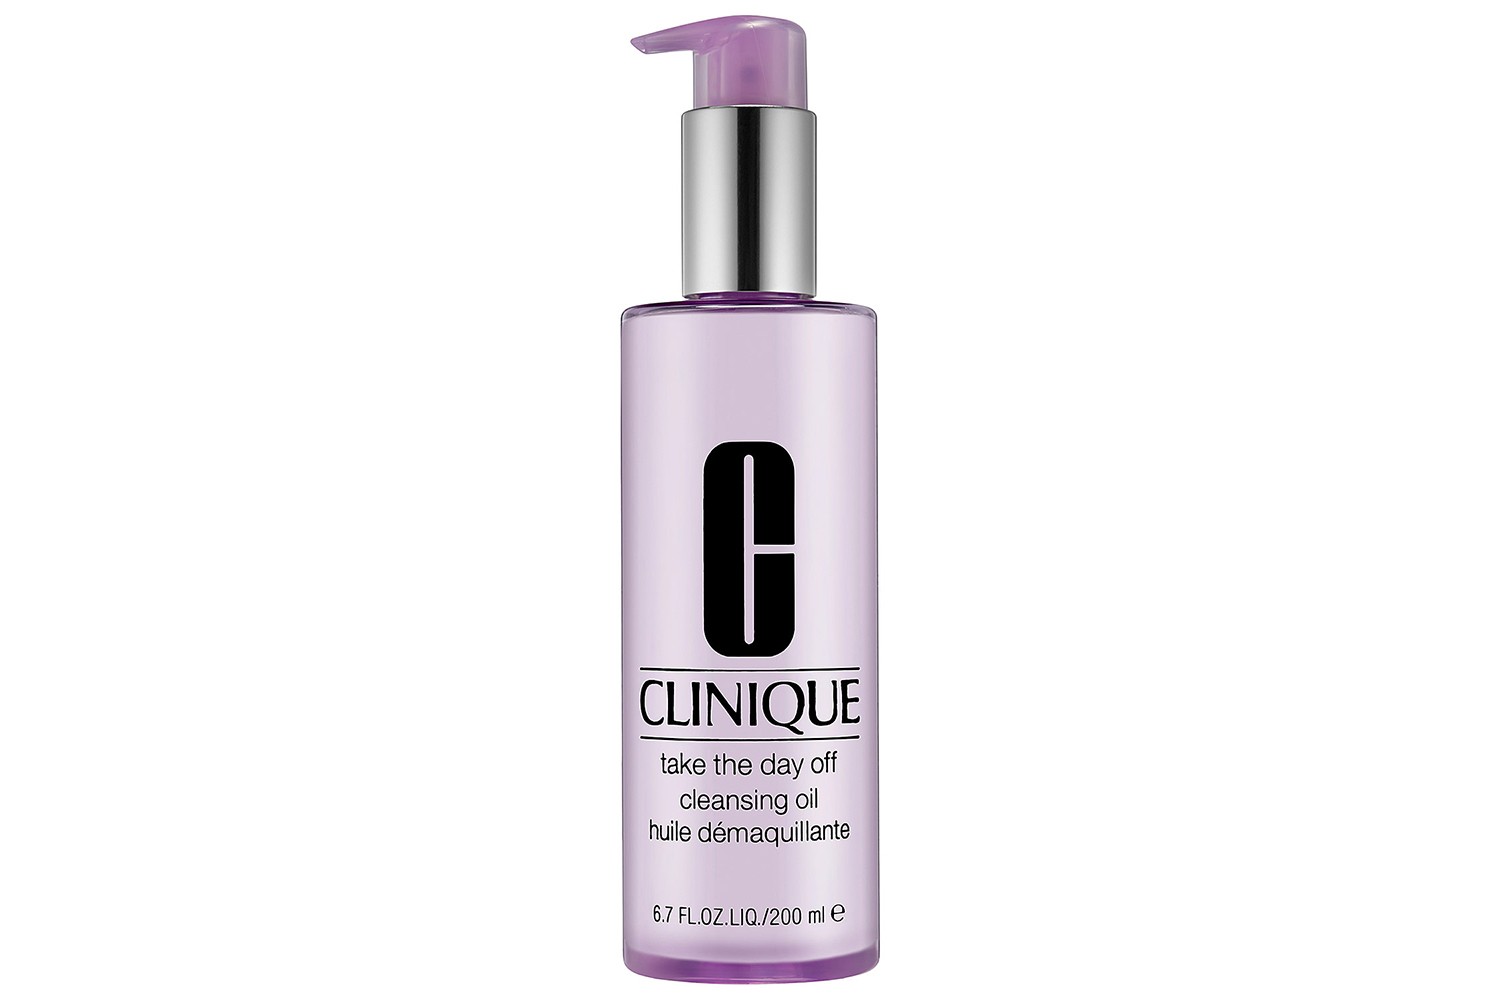 Take the Day Off Cleansing Oil, Clinique (R$ 175)